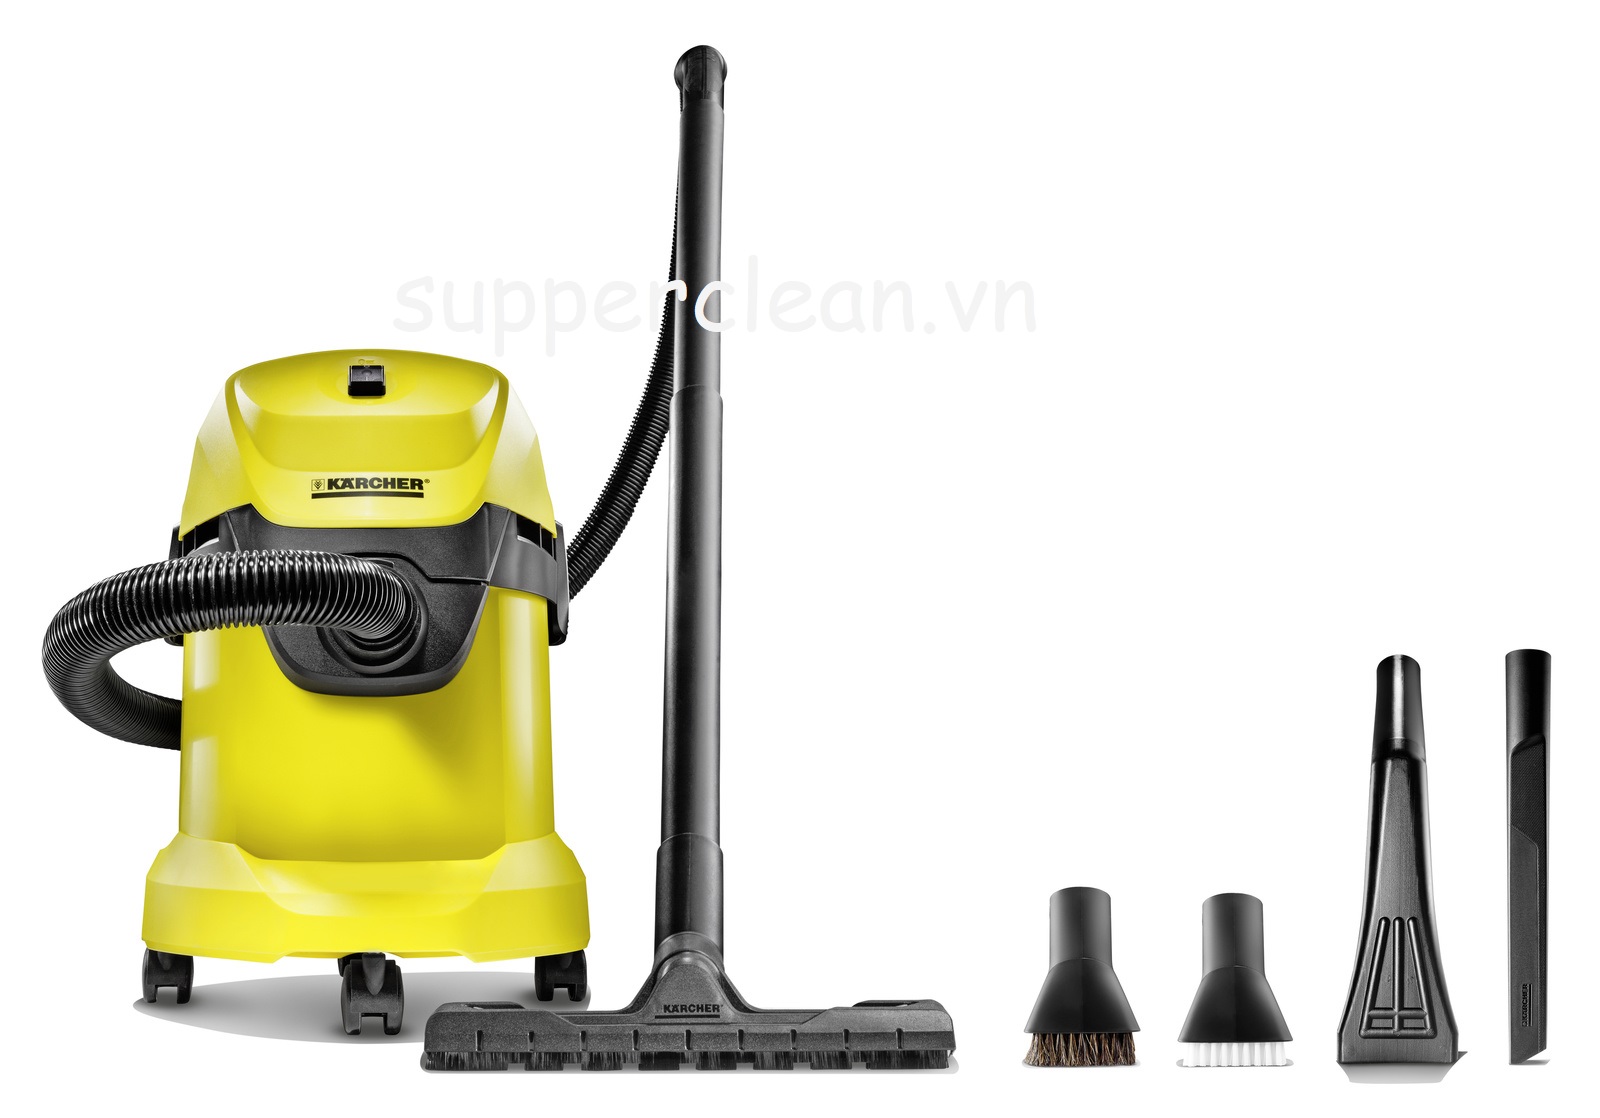 may-hut-bui-cong-nghiep-karcher-wd-3